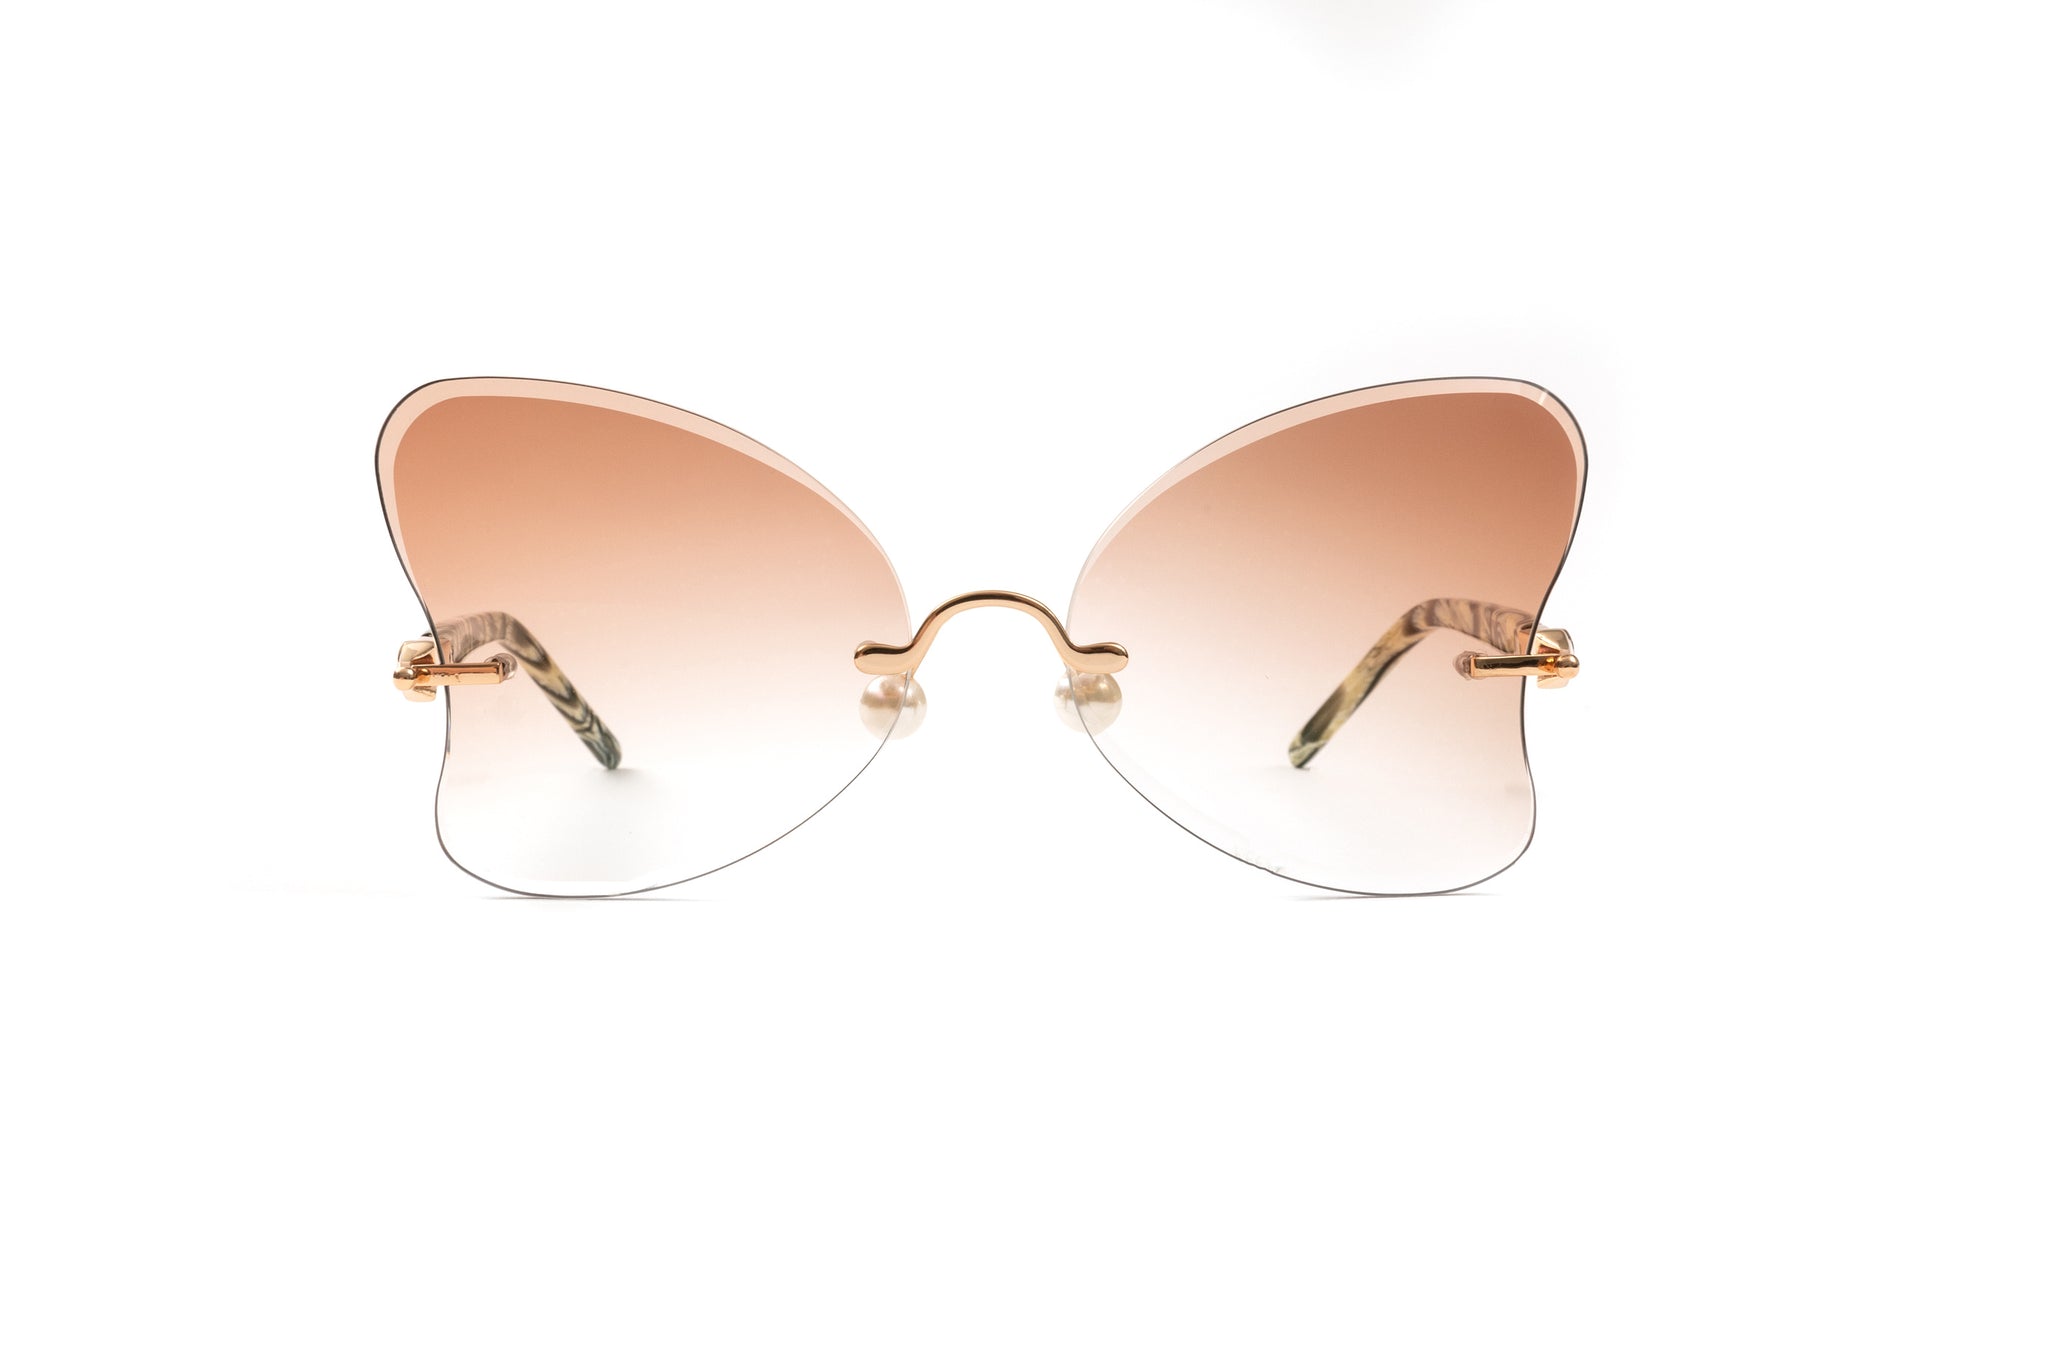 Butterfly 18KT Gold Pearl Collection Sunglasses, White and Black Horn Style Acetate